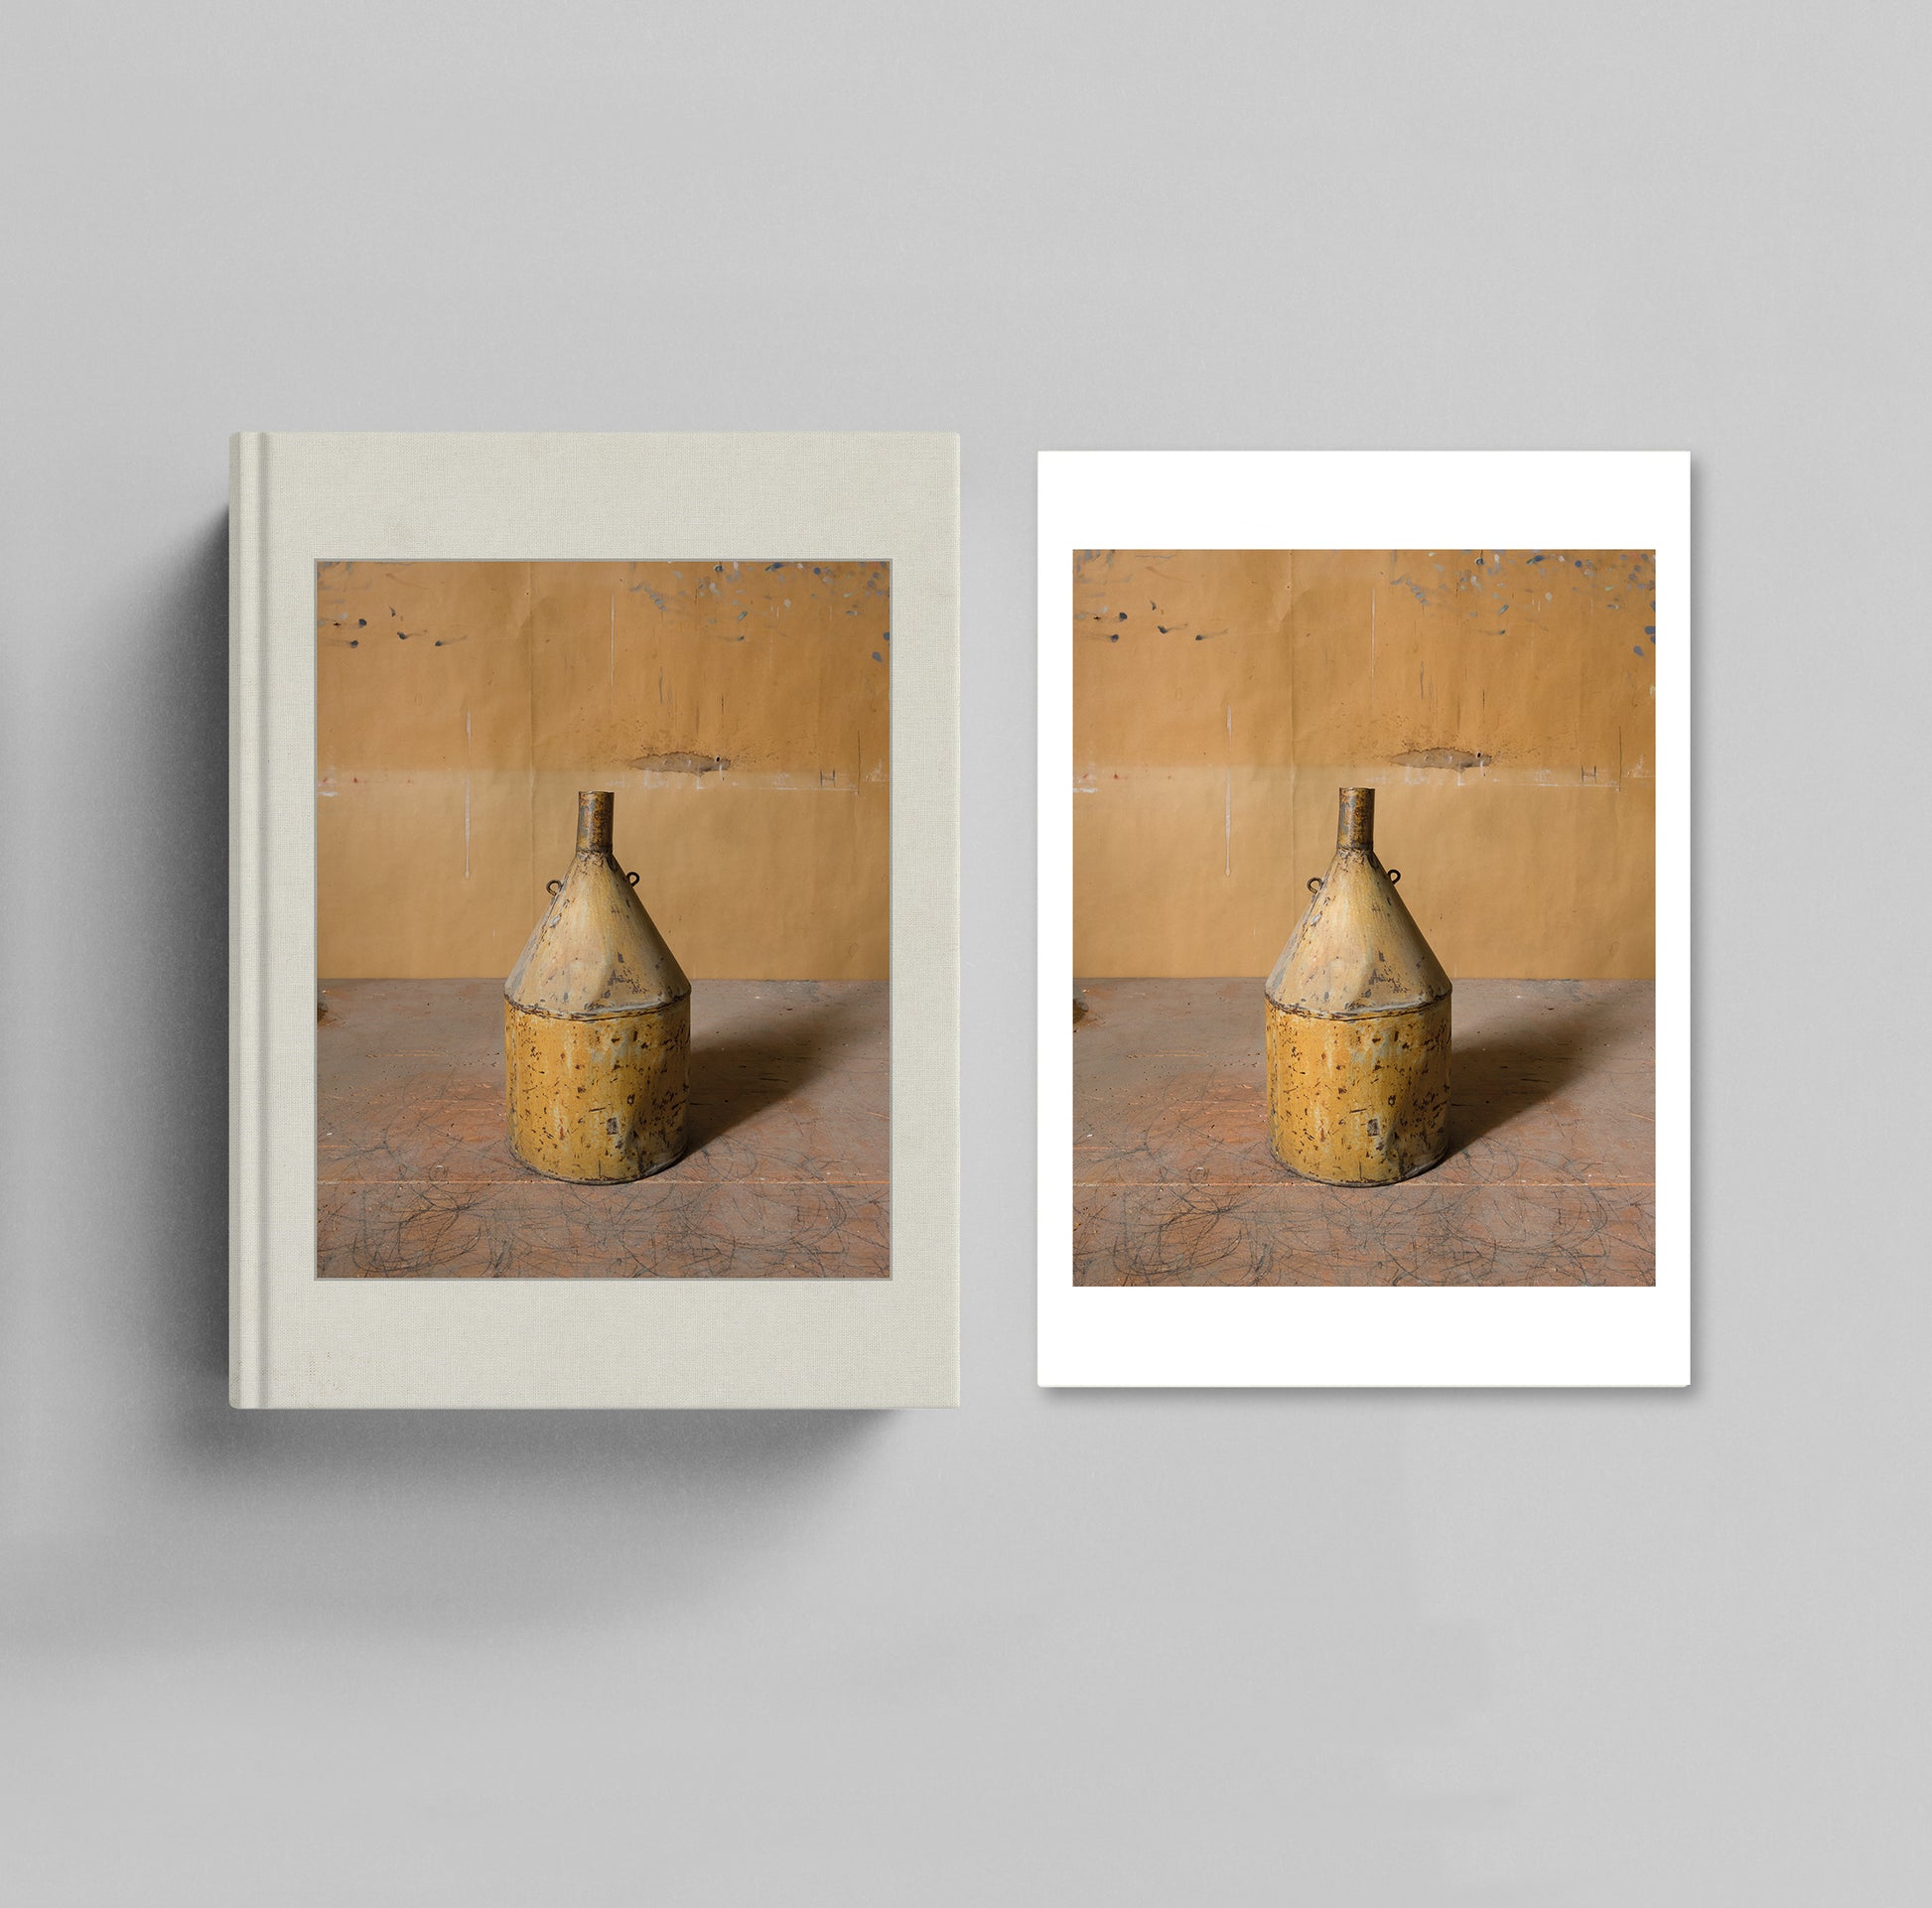 Morandi’s Objects. The Last Object | Collector's Edition Default Title